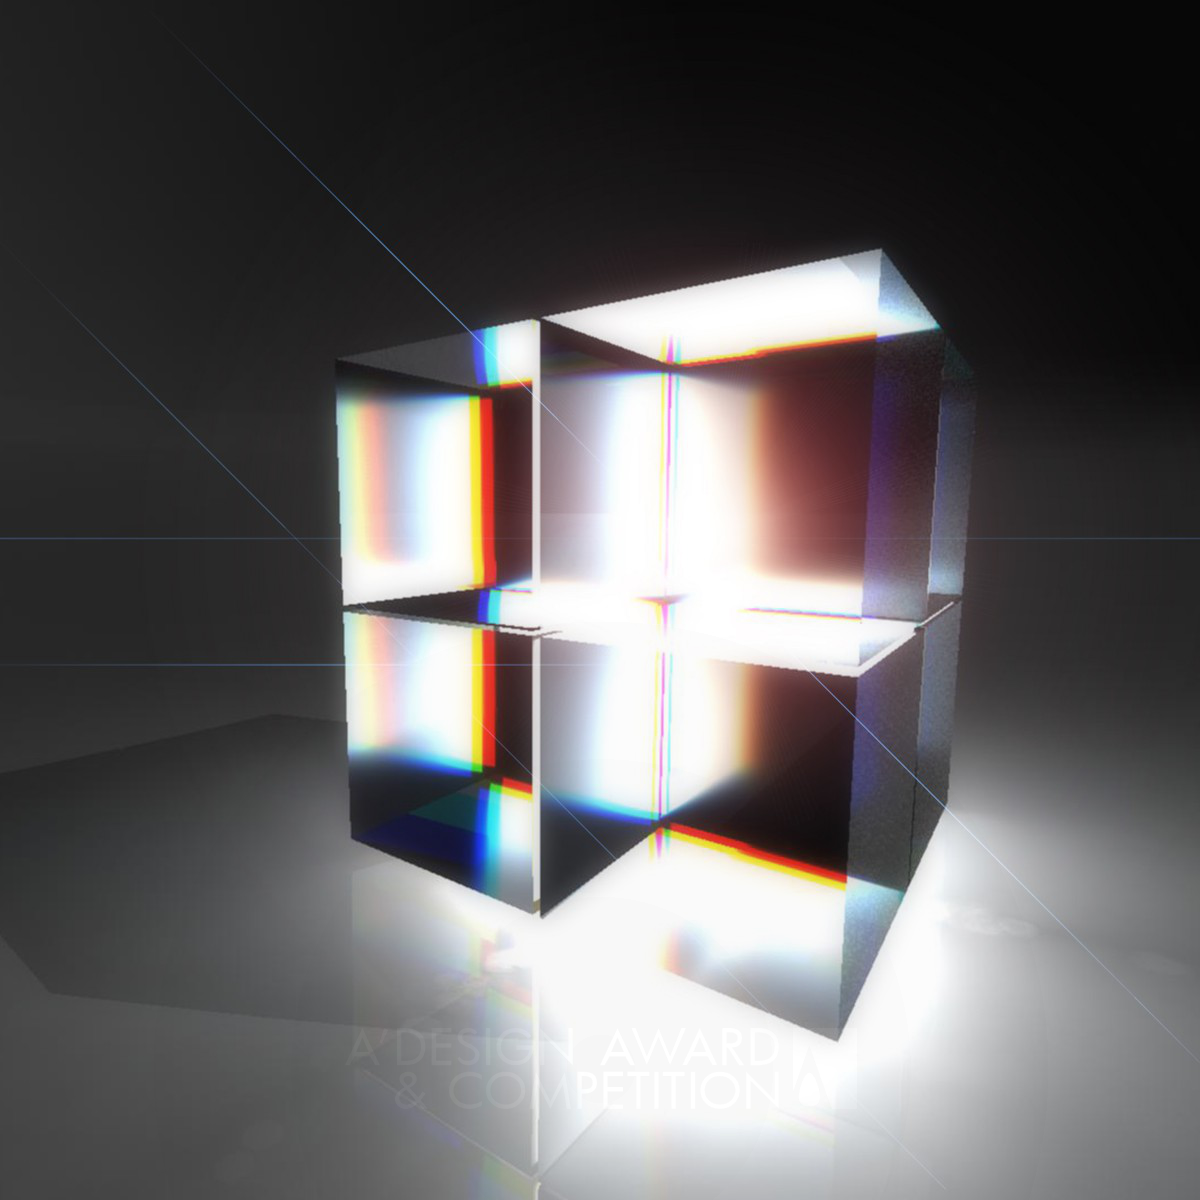 Cubeoled Luminaire by Markus Fuerderer